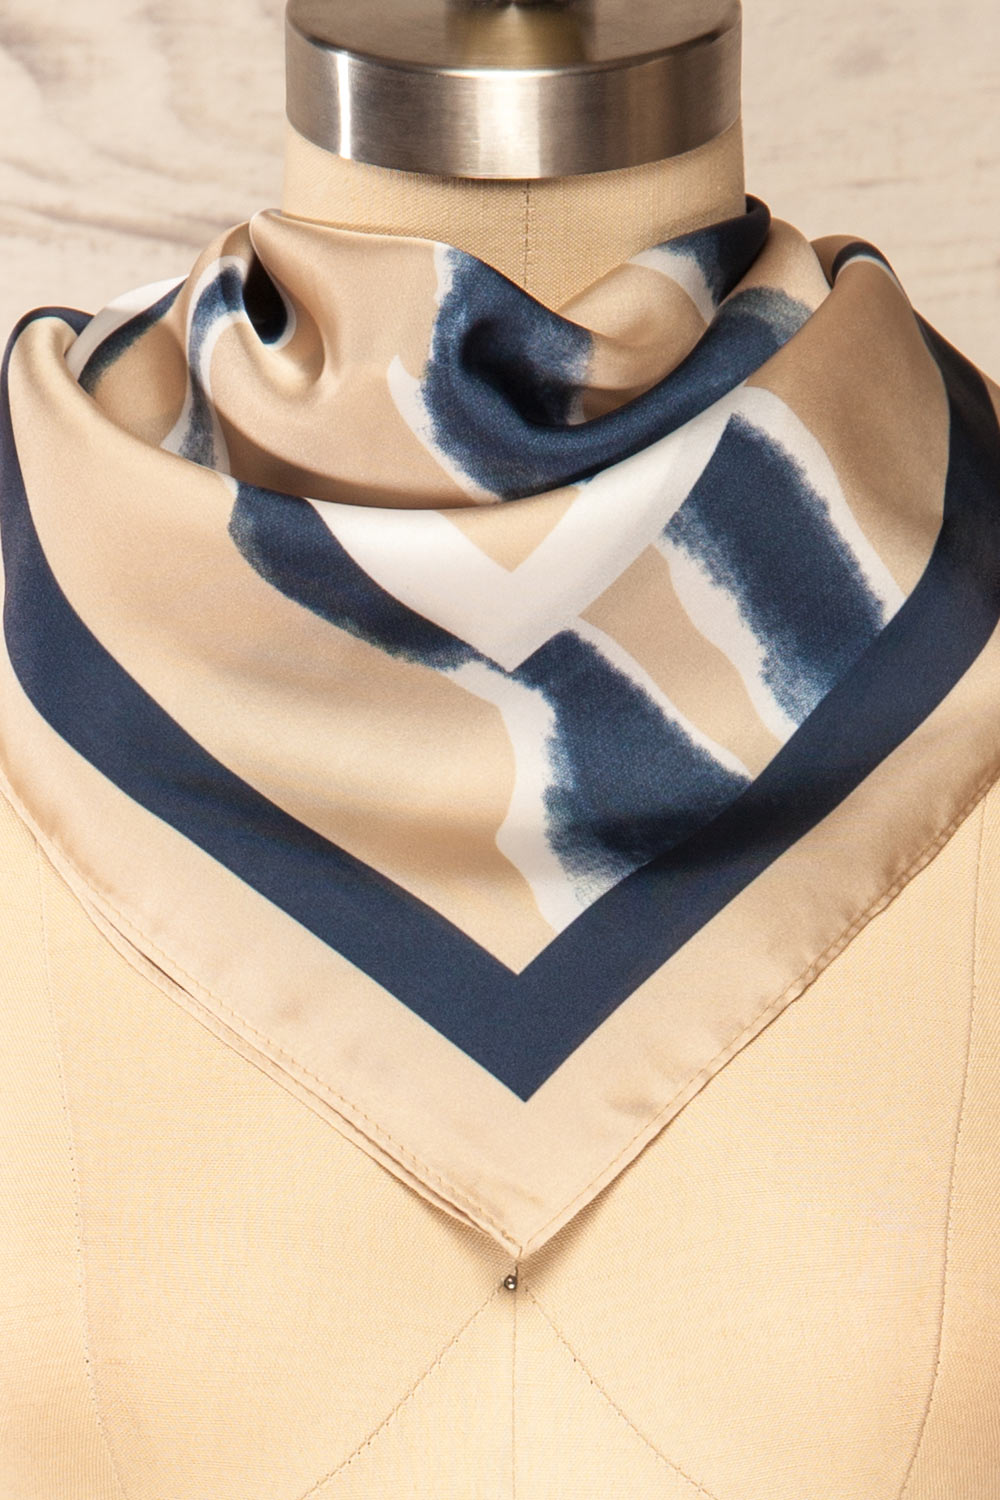 St-Jacques Champagne Satin Scarf w/ Abstract Print close-up